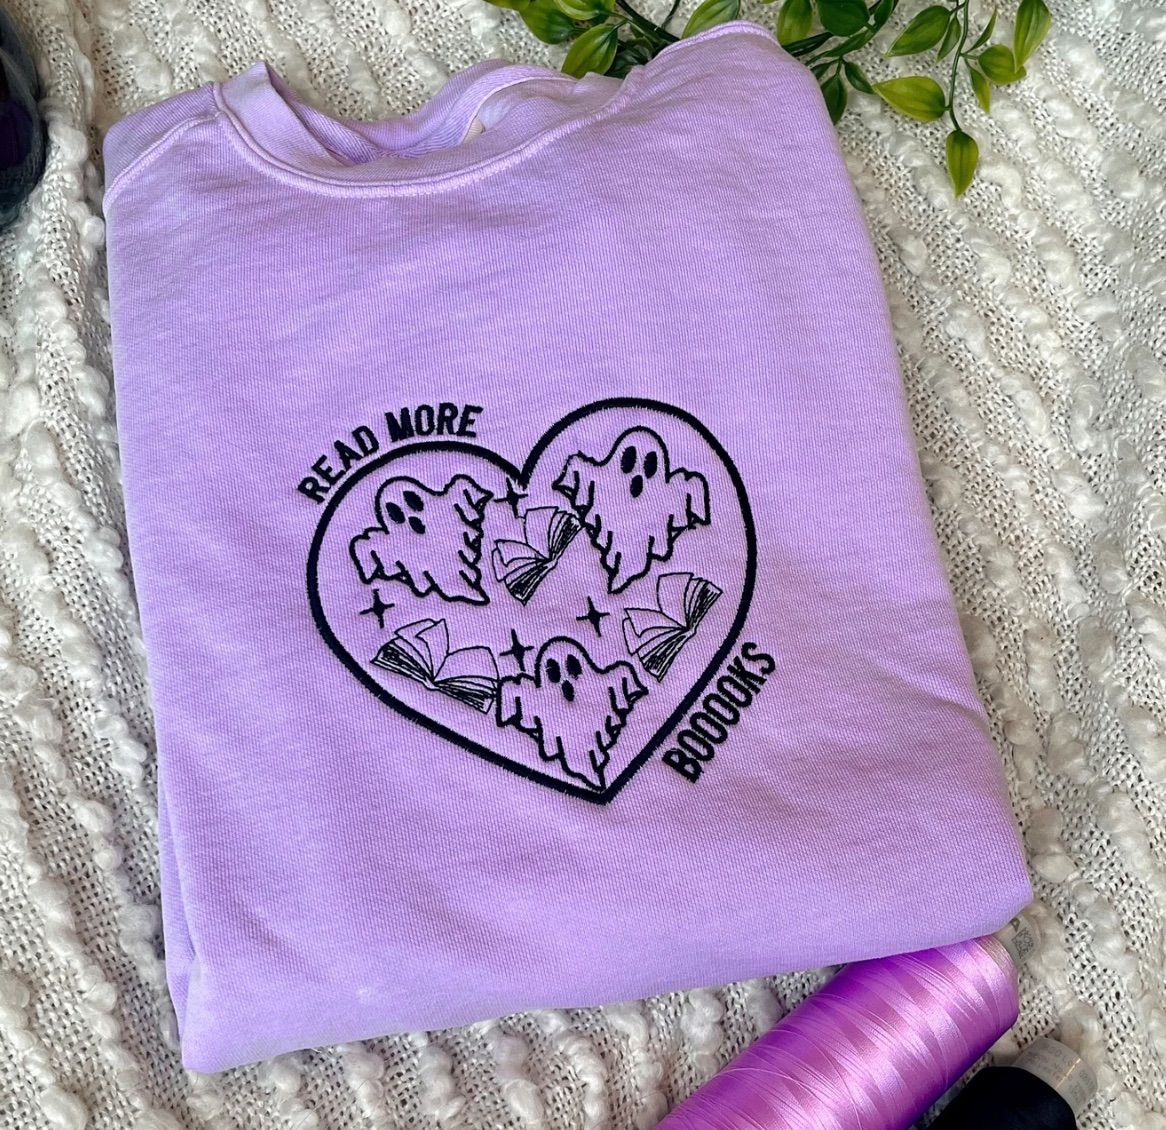 a purple sweatshirt with black embroidery. There is a heart with ghosts and books inside and text outside the heart says "read more booooks."